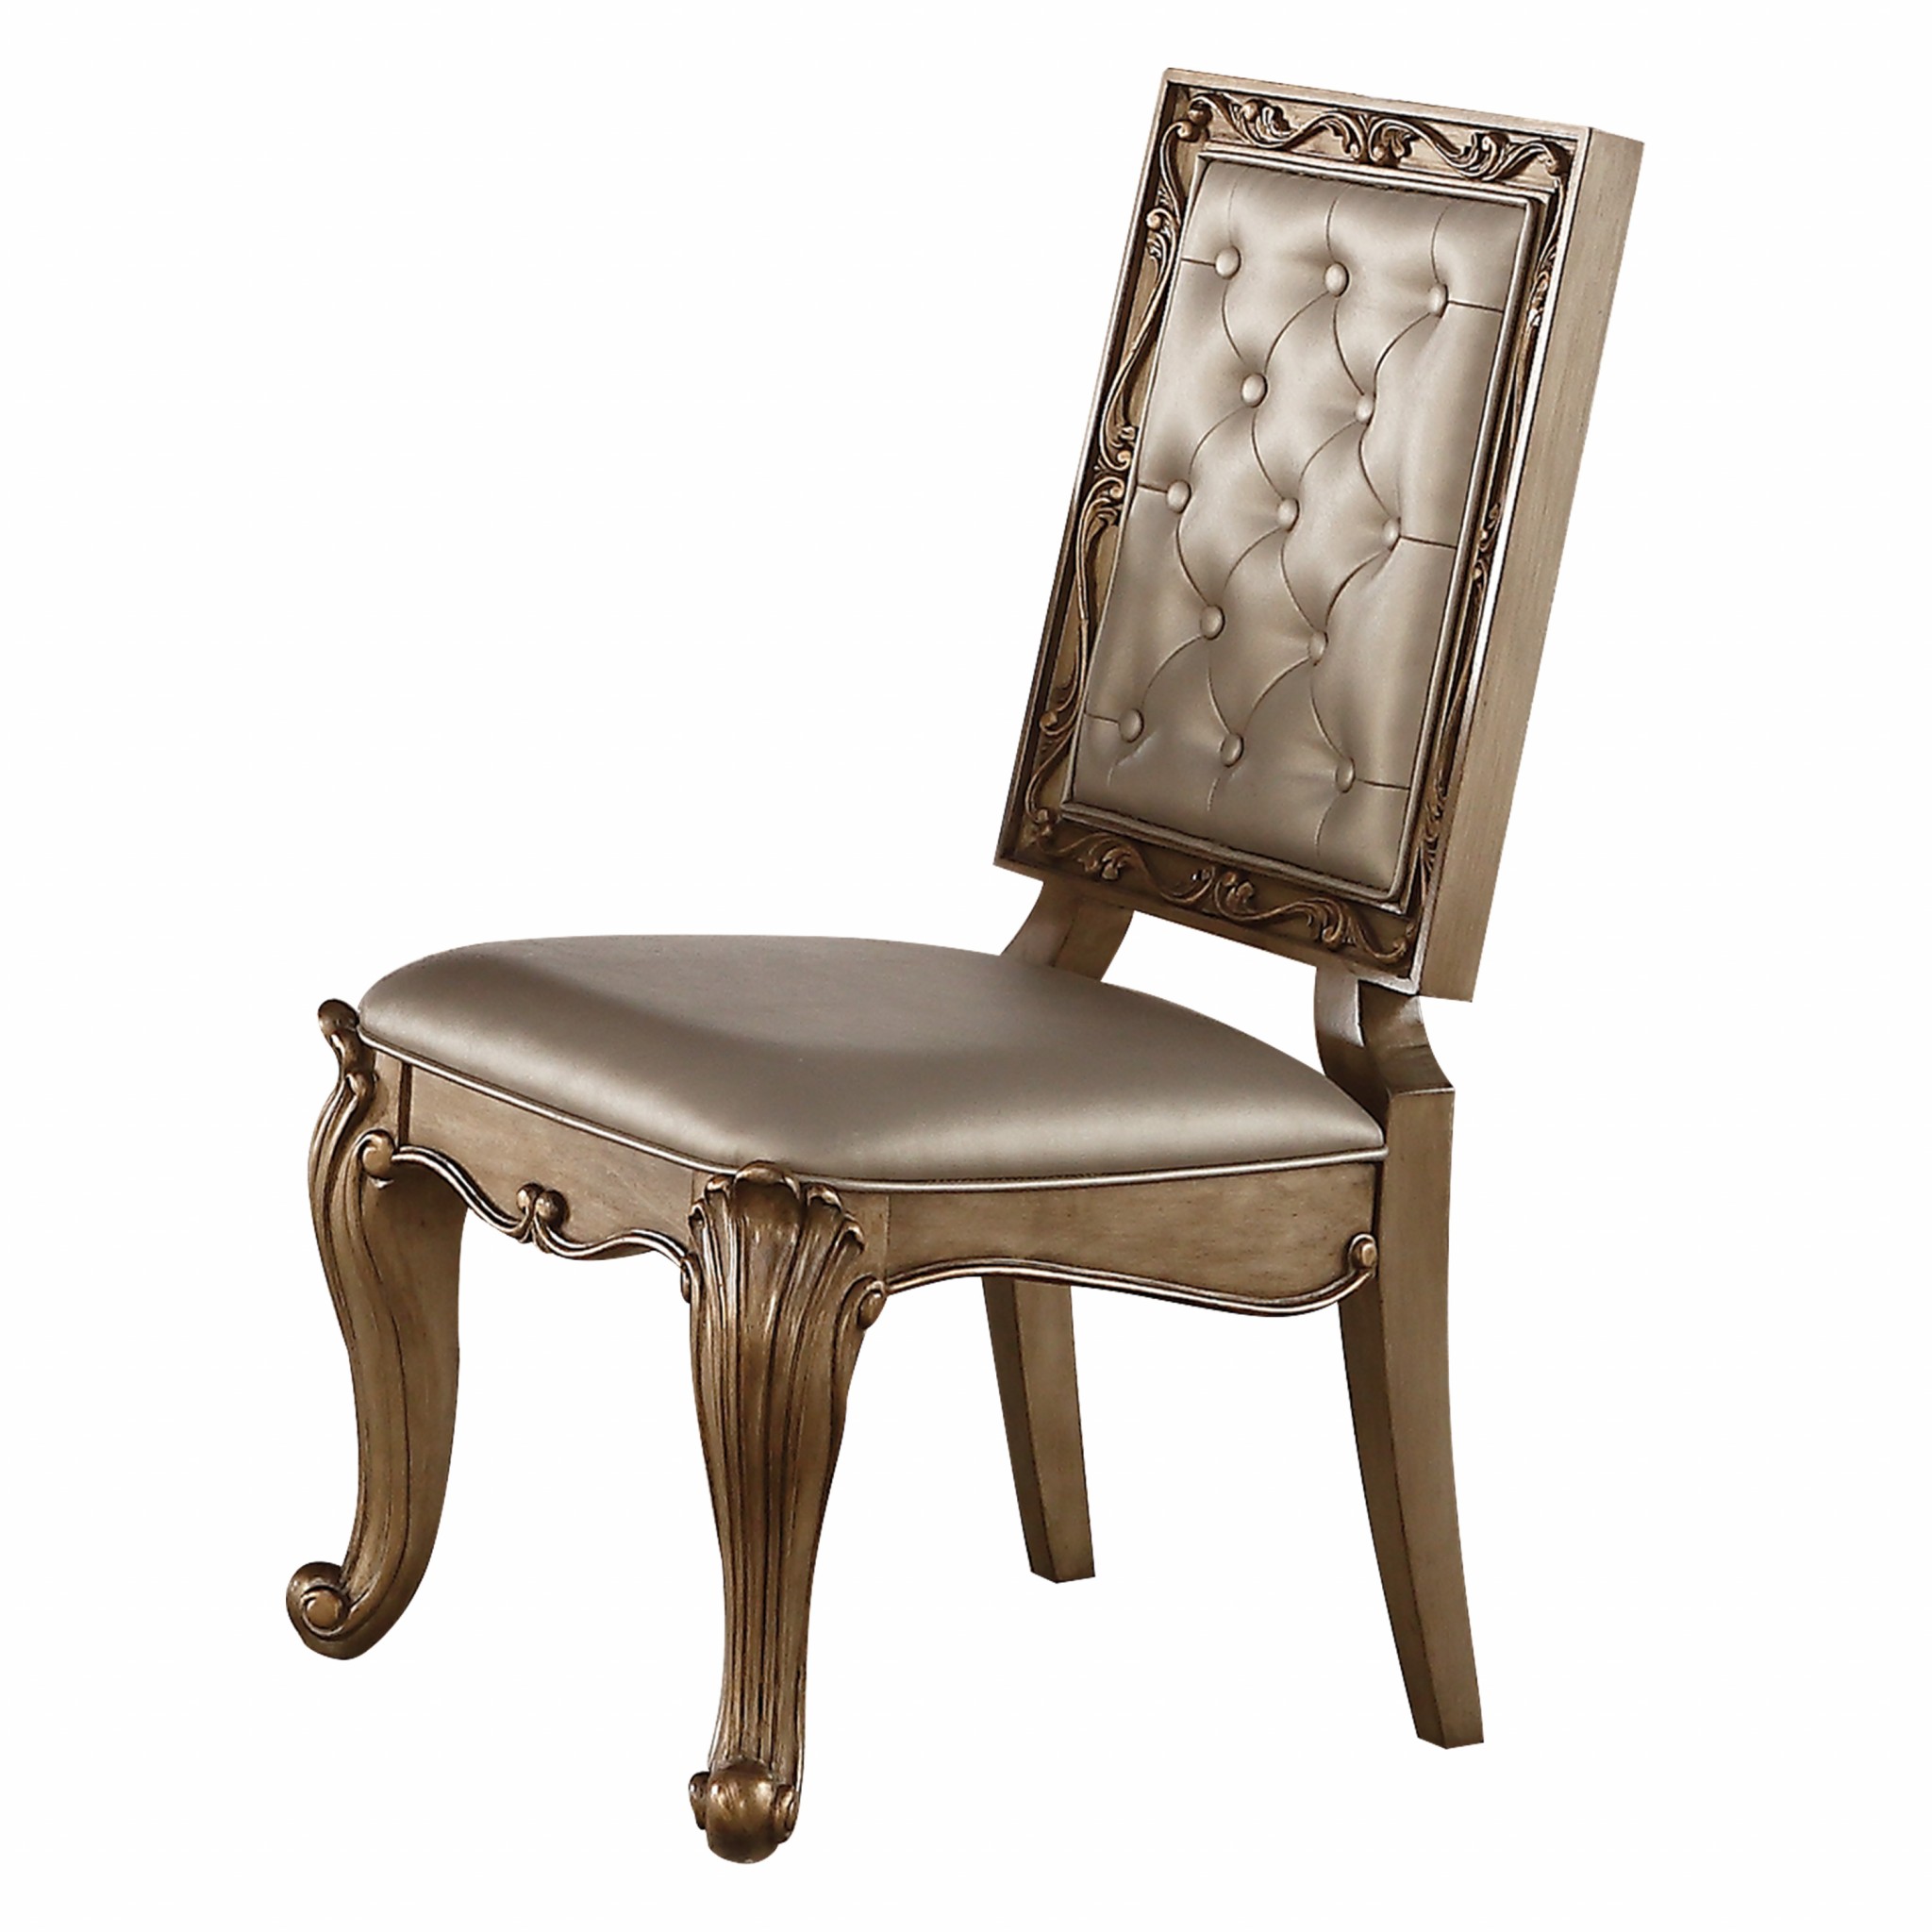 24" X 20" X 40" 2pc Champagne Leatherette And Antique Gold Side Chair